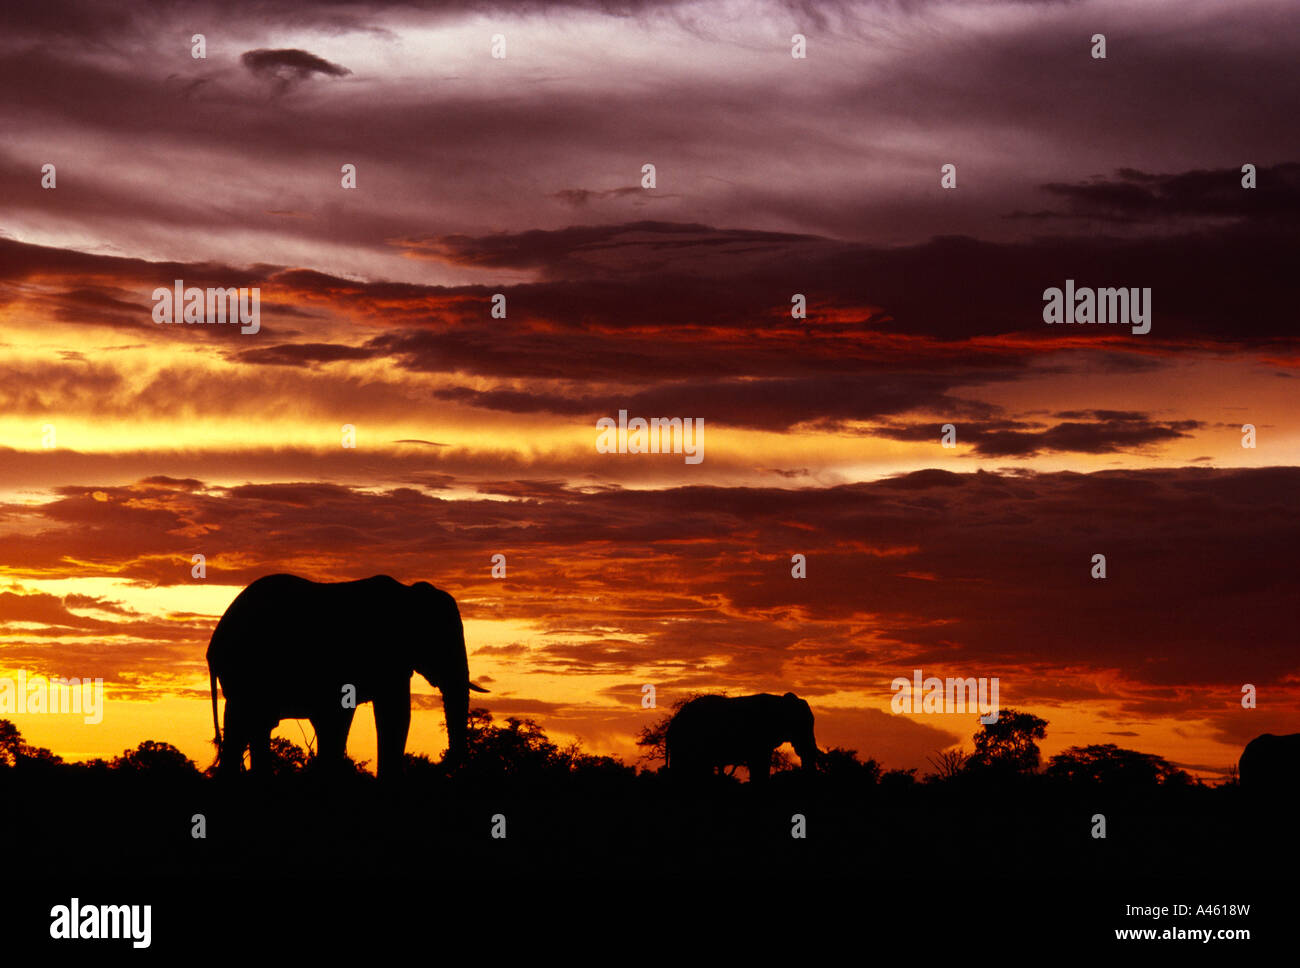 SOUTH AFRICA East Transvaal Kruger National Park Two African Elephants Loxodonta africana walking on the horizon at sunset Stock Photo